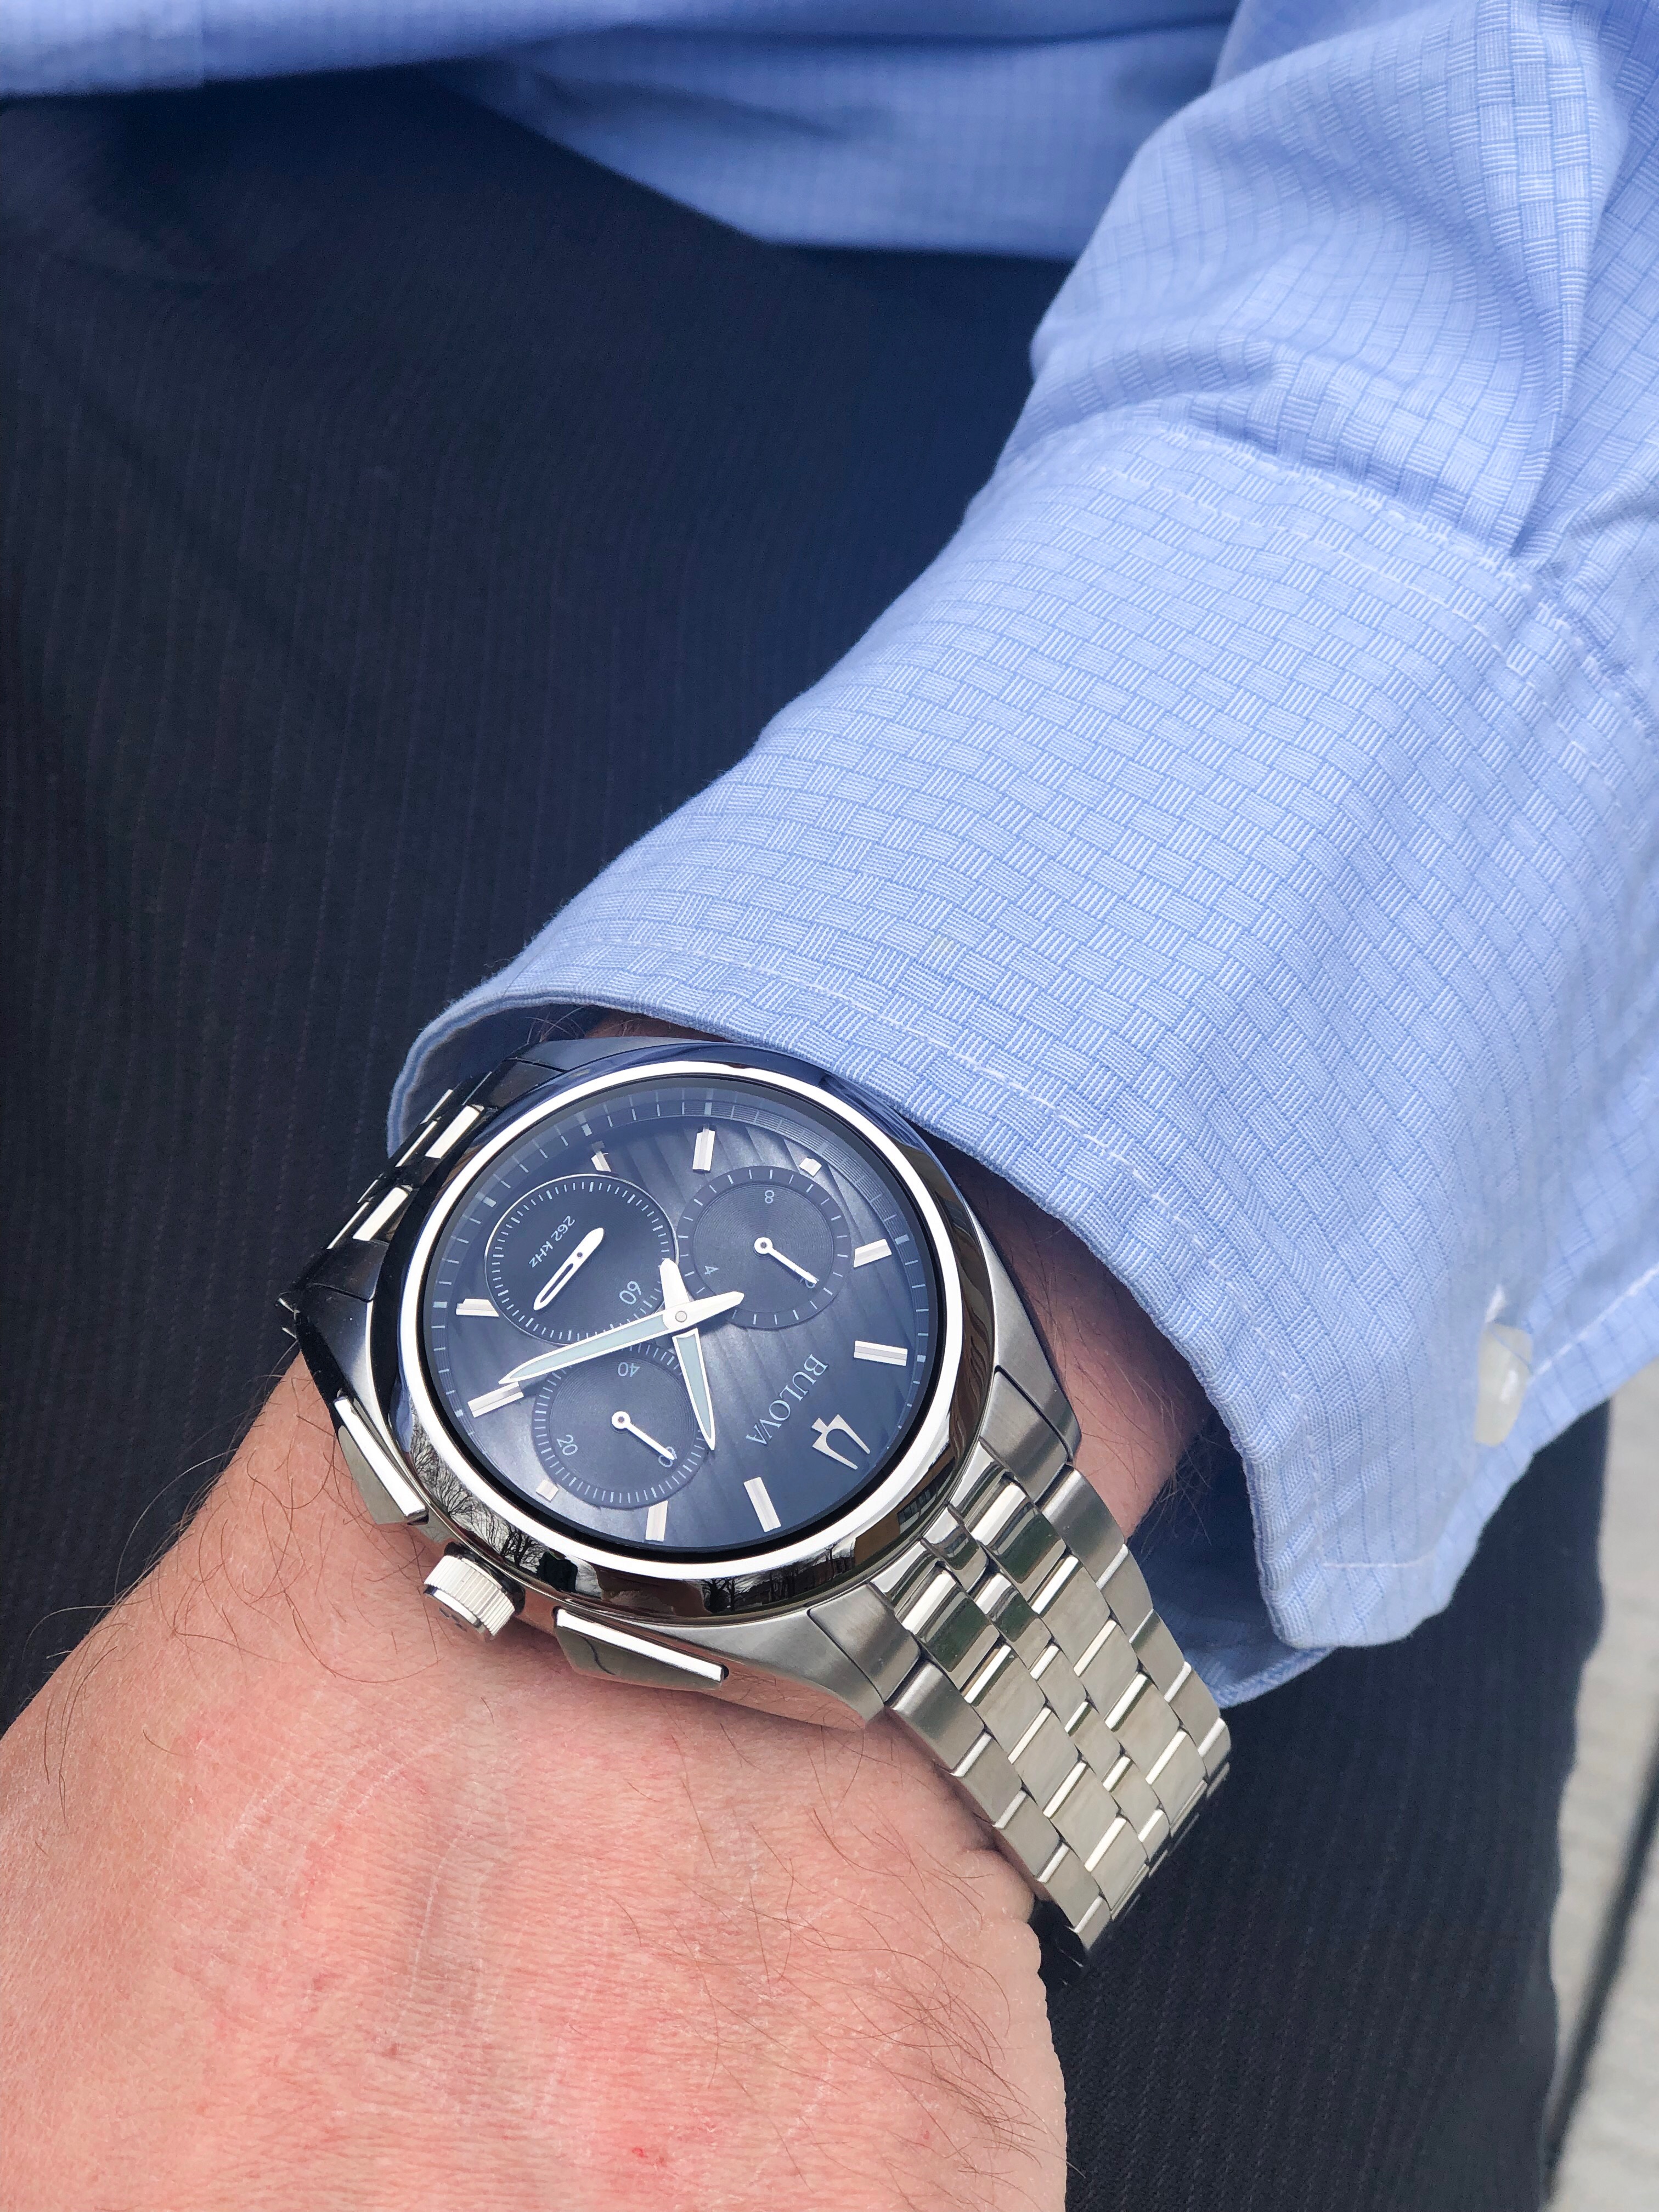 Men's Curv Chronograph Watch by Bulova on Livin' Life with Style 